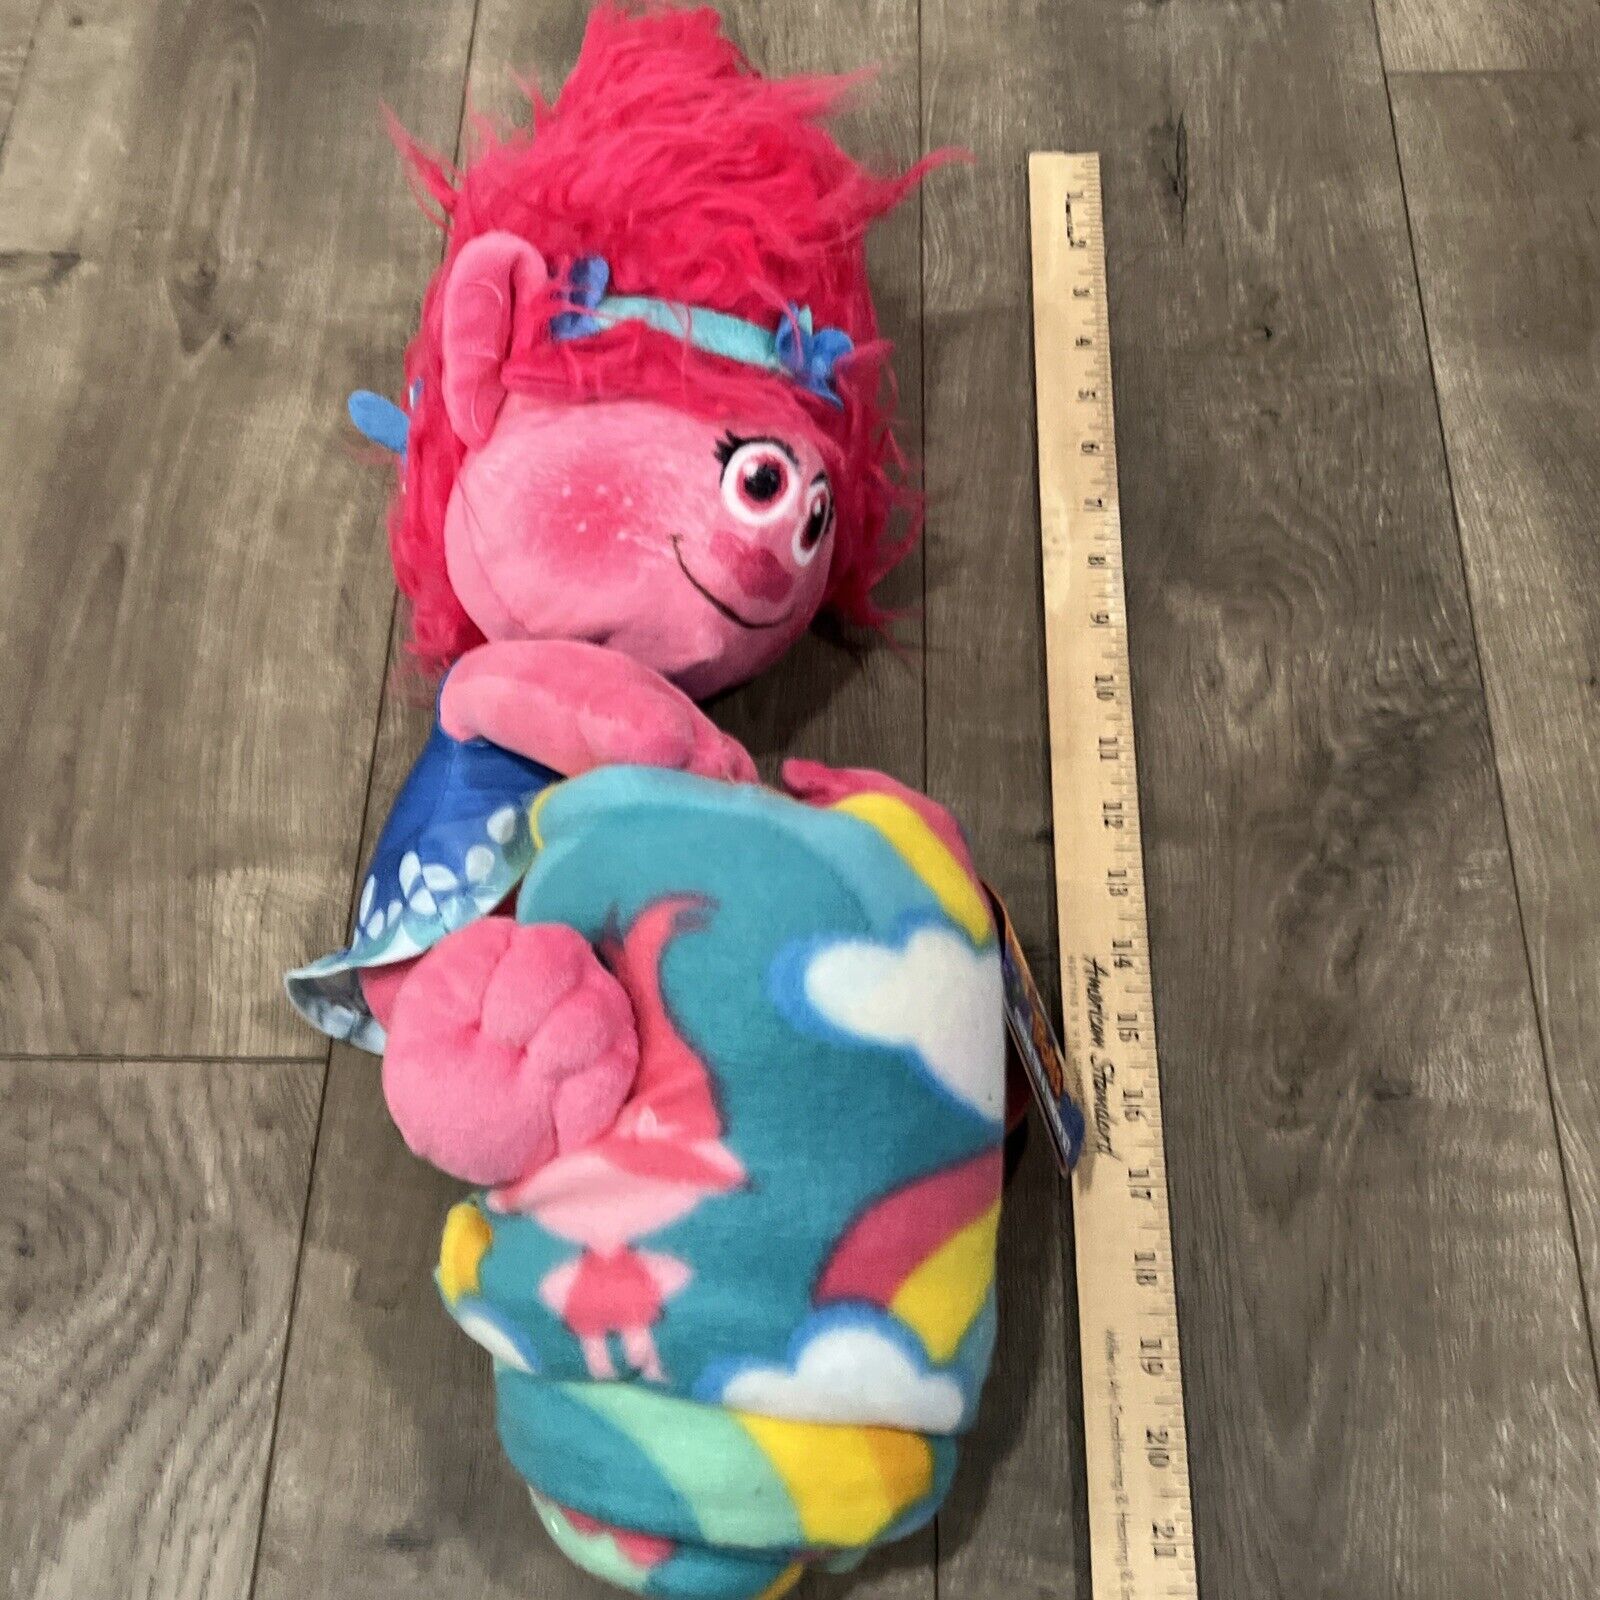 Dreamworks Trolls Baby Poppy Plush Toy 17” character and throw set